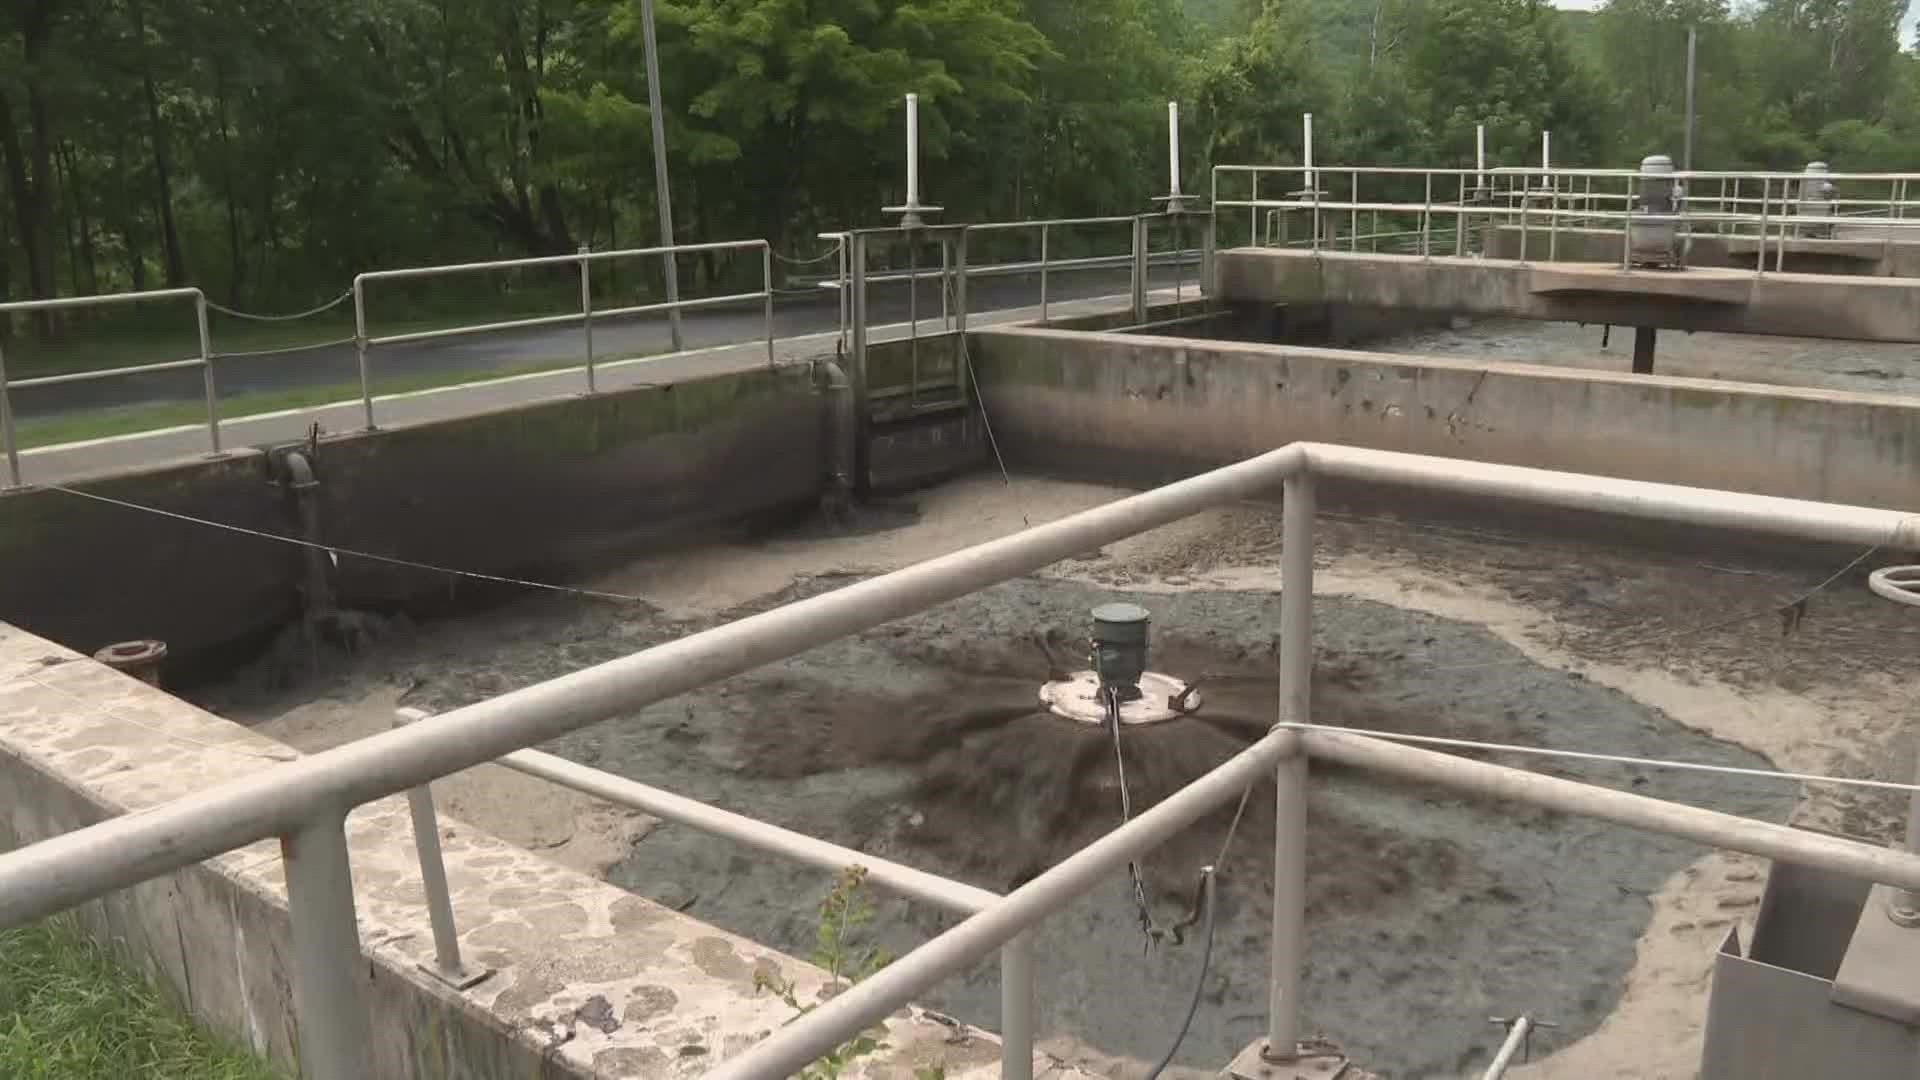 Maine received $20 million in federal relief money in July aimed at securing wastewater facilities, culverts, and other unnoticed systems.